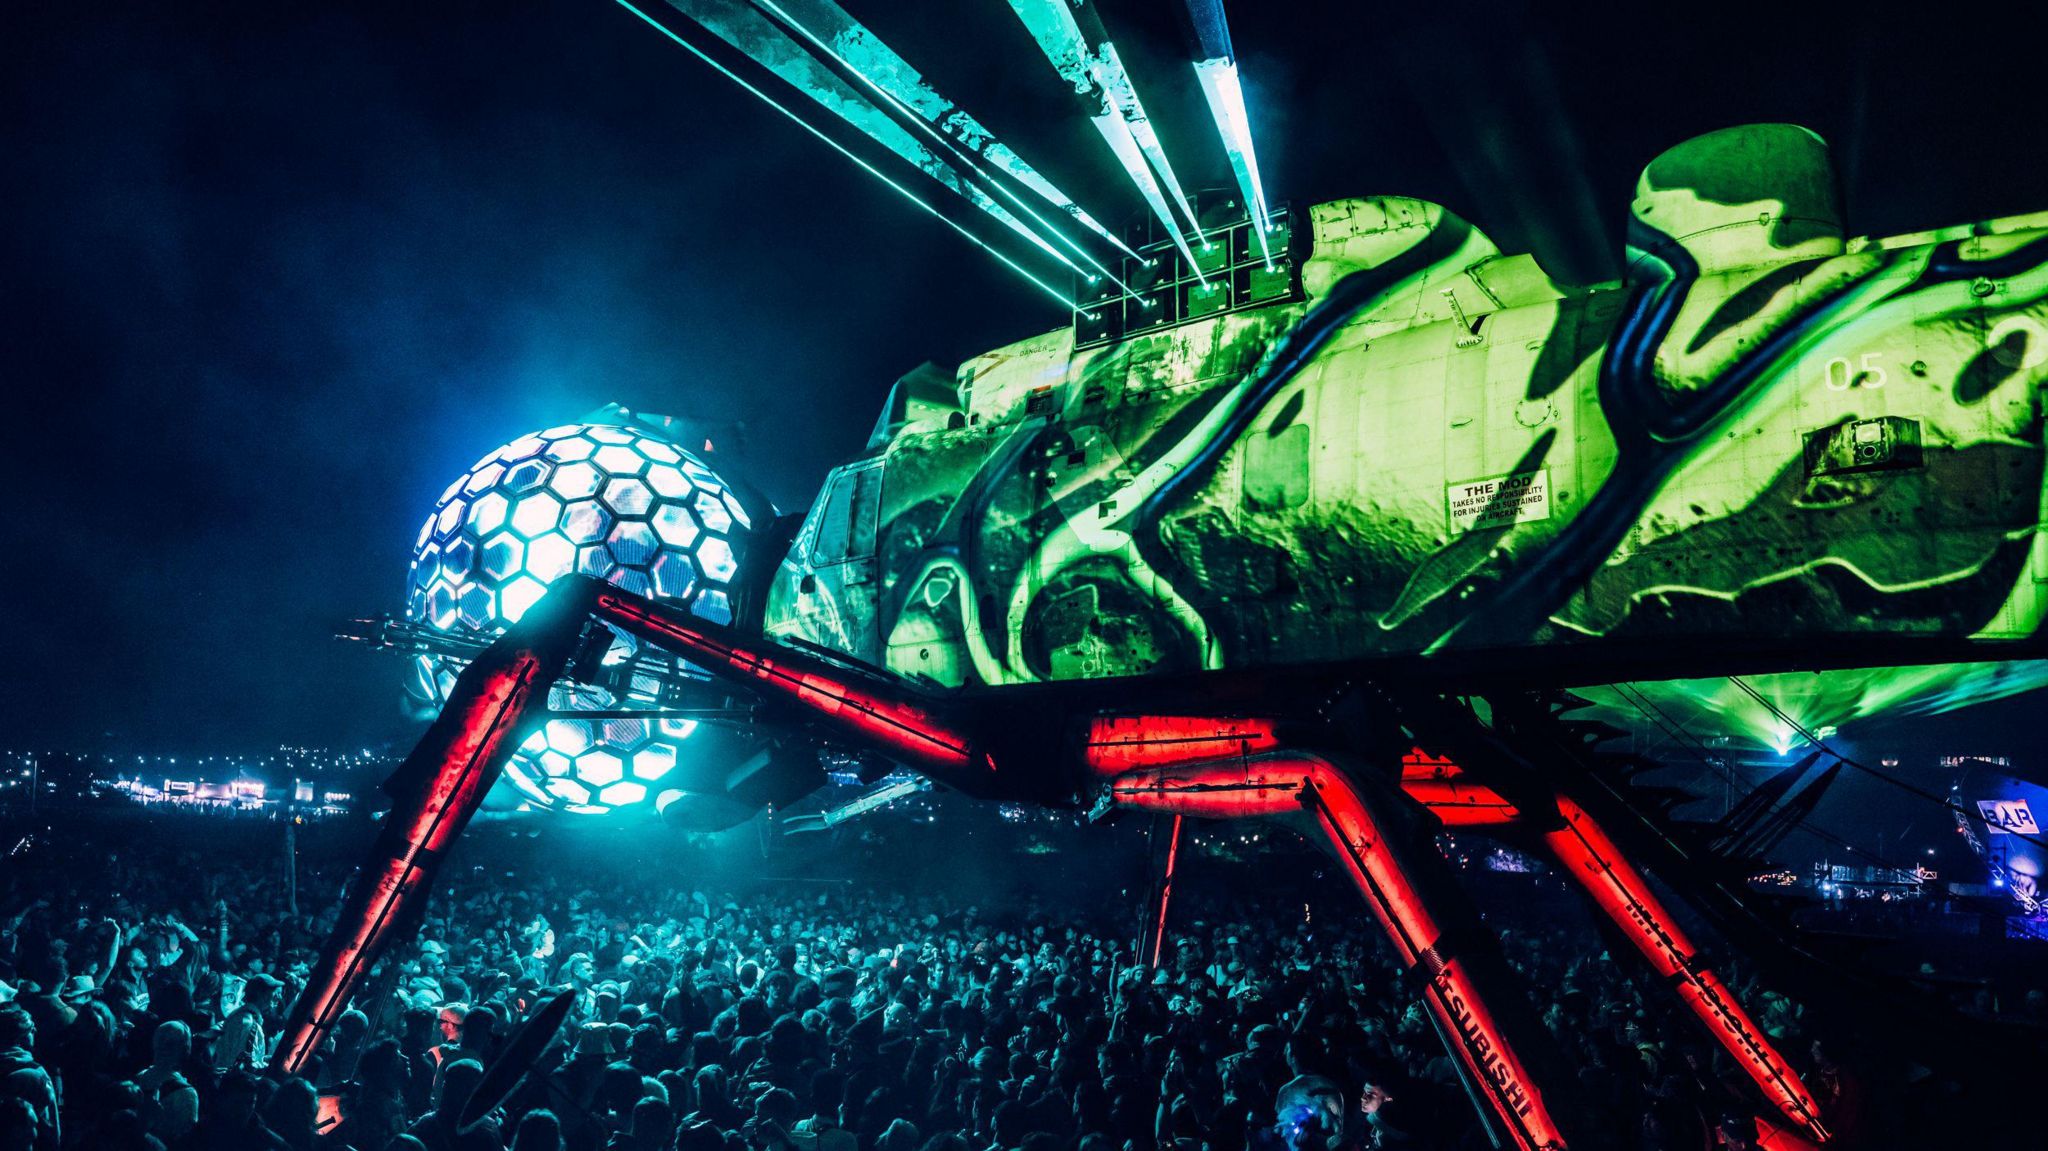 A biomechanical dragonfly lit up in blue and green with thousands of people dancing underneath.